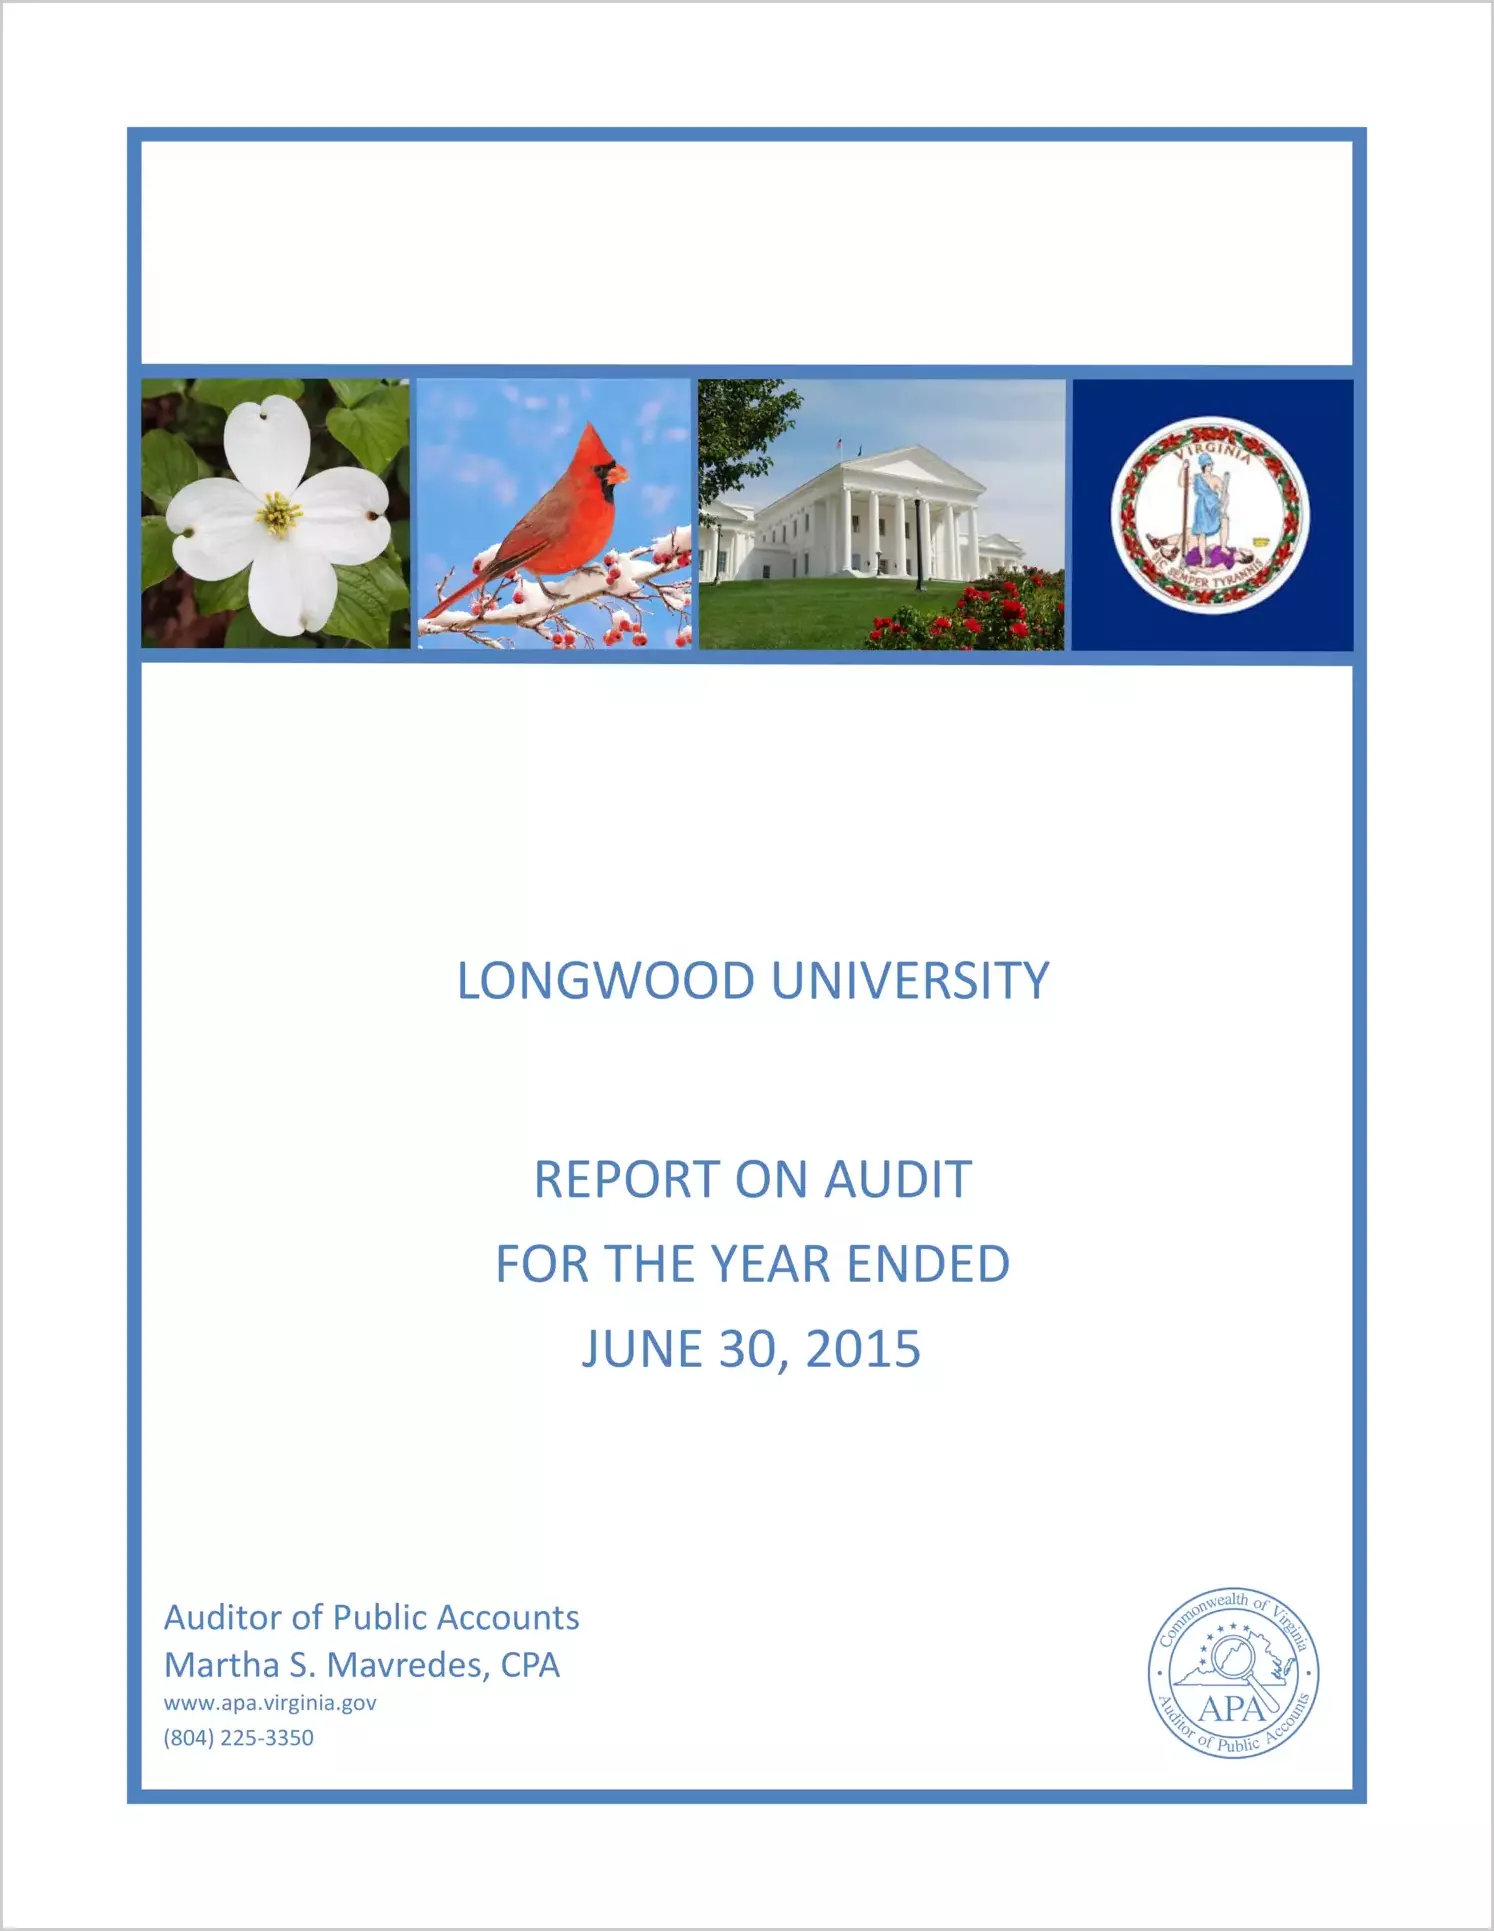 Longwood University Report on Audit for the Year Ended June 30, 2015